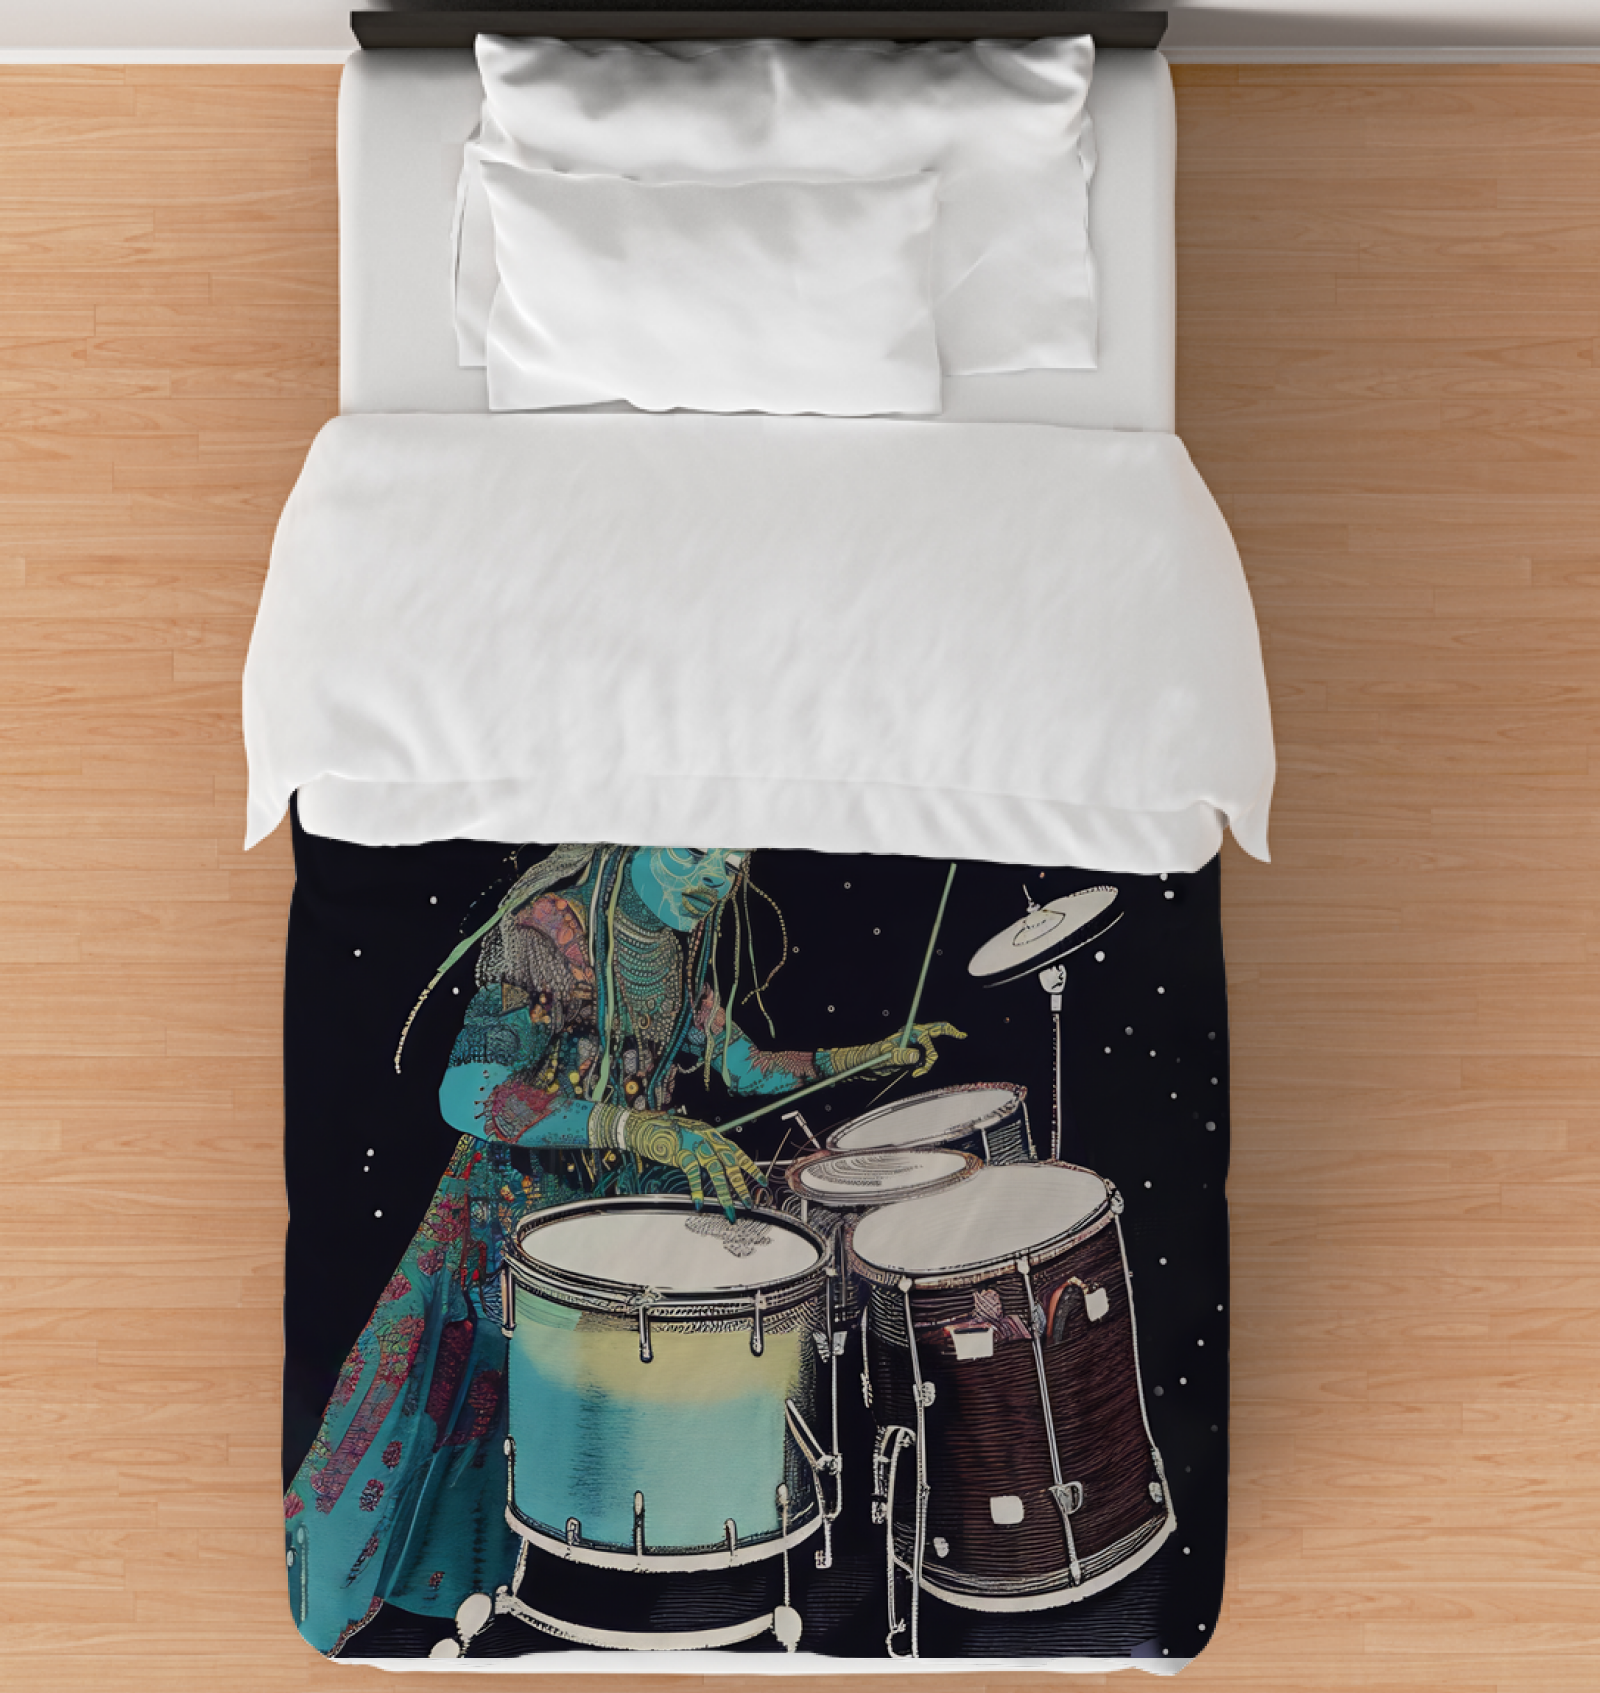 Melodic Harmony Duvet Cover on a neatly made bed in a stylish bedroom.